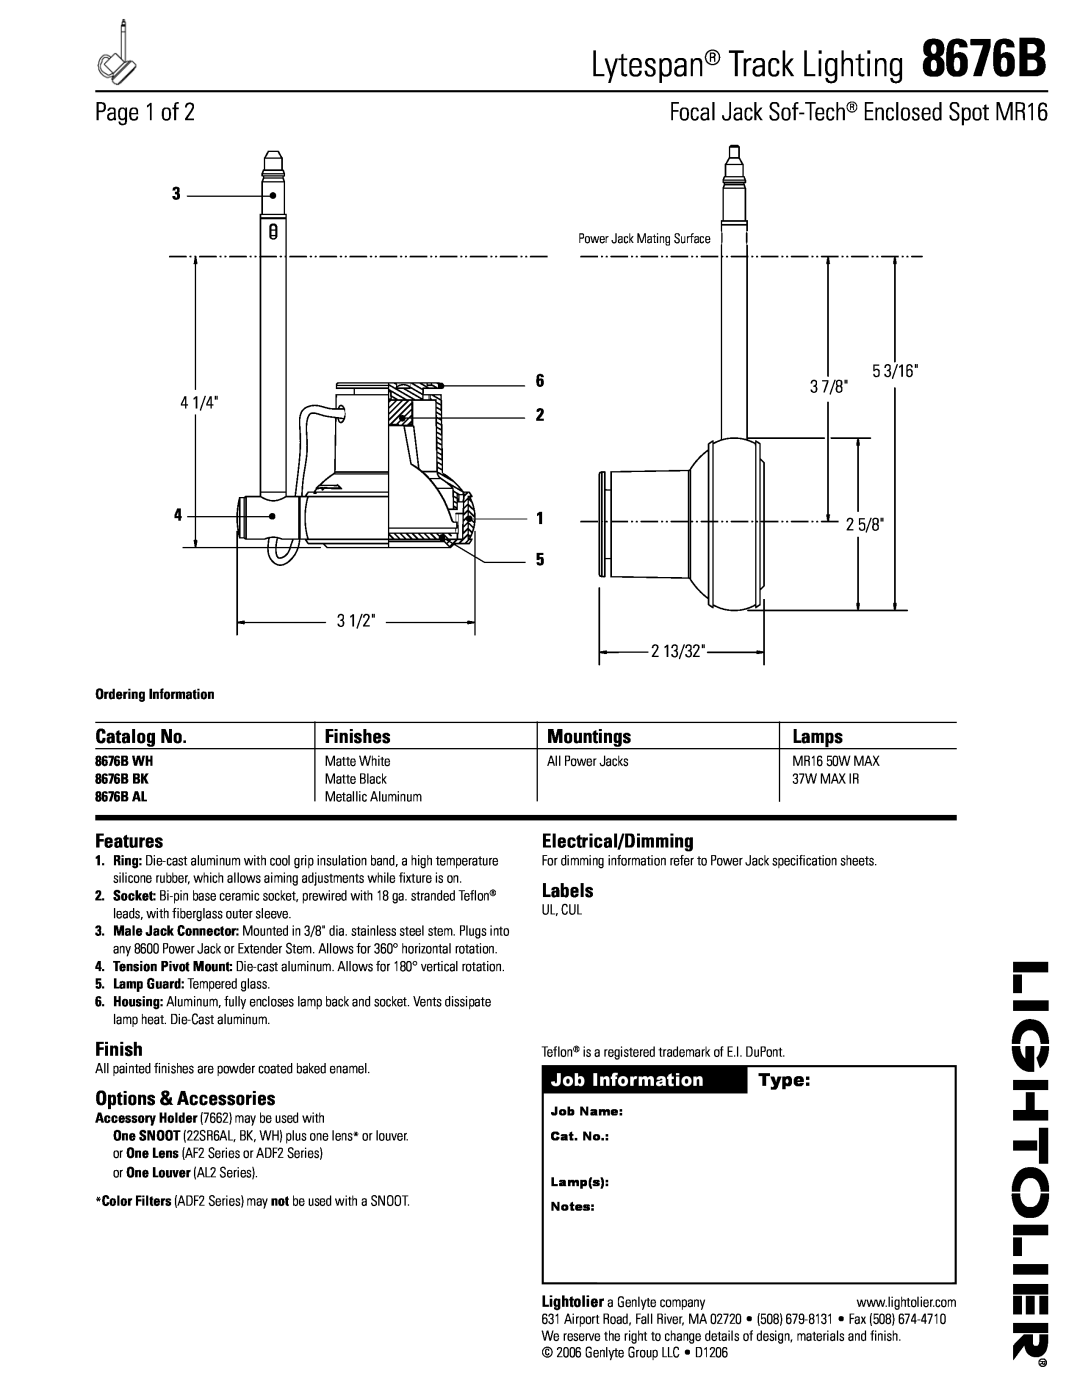 Lightolier specifications Page of, 5 3/16, 3 7/8, 2 5/8, Job Information, Type, Lytespan Track Lighting 8676B, Finishes 